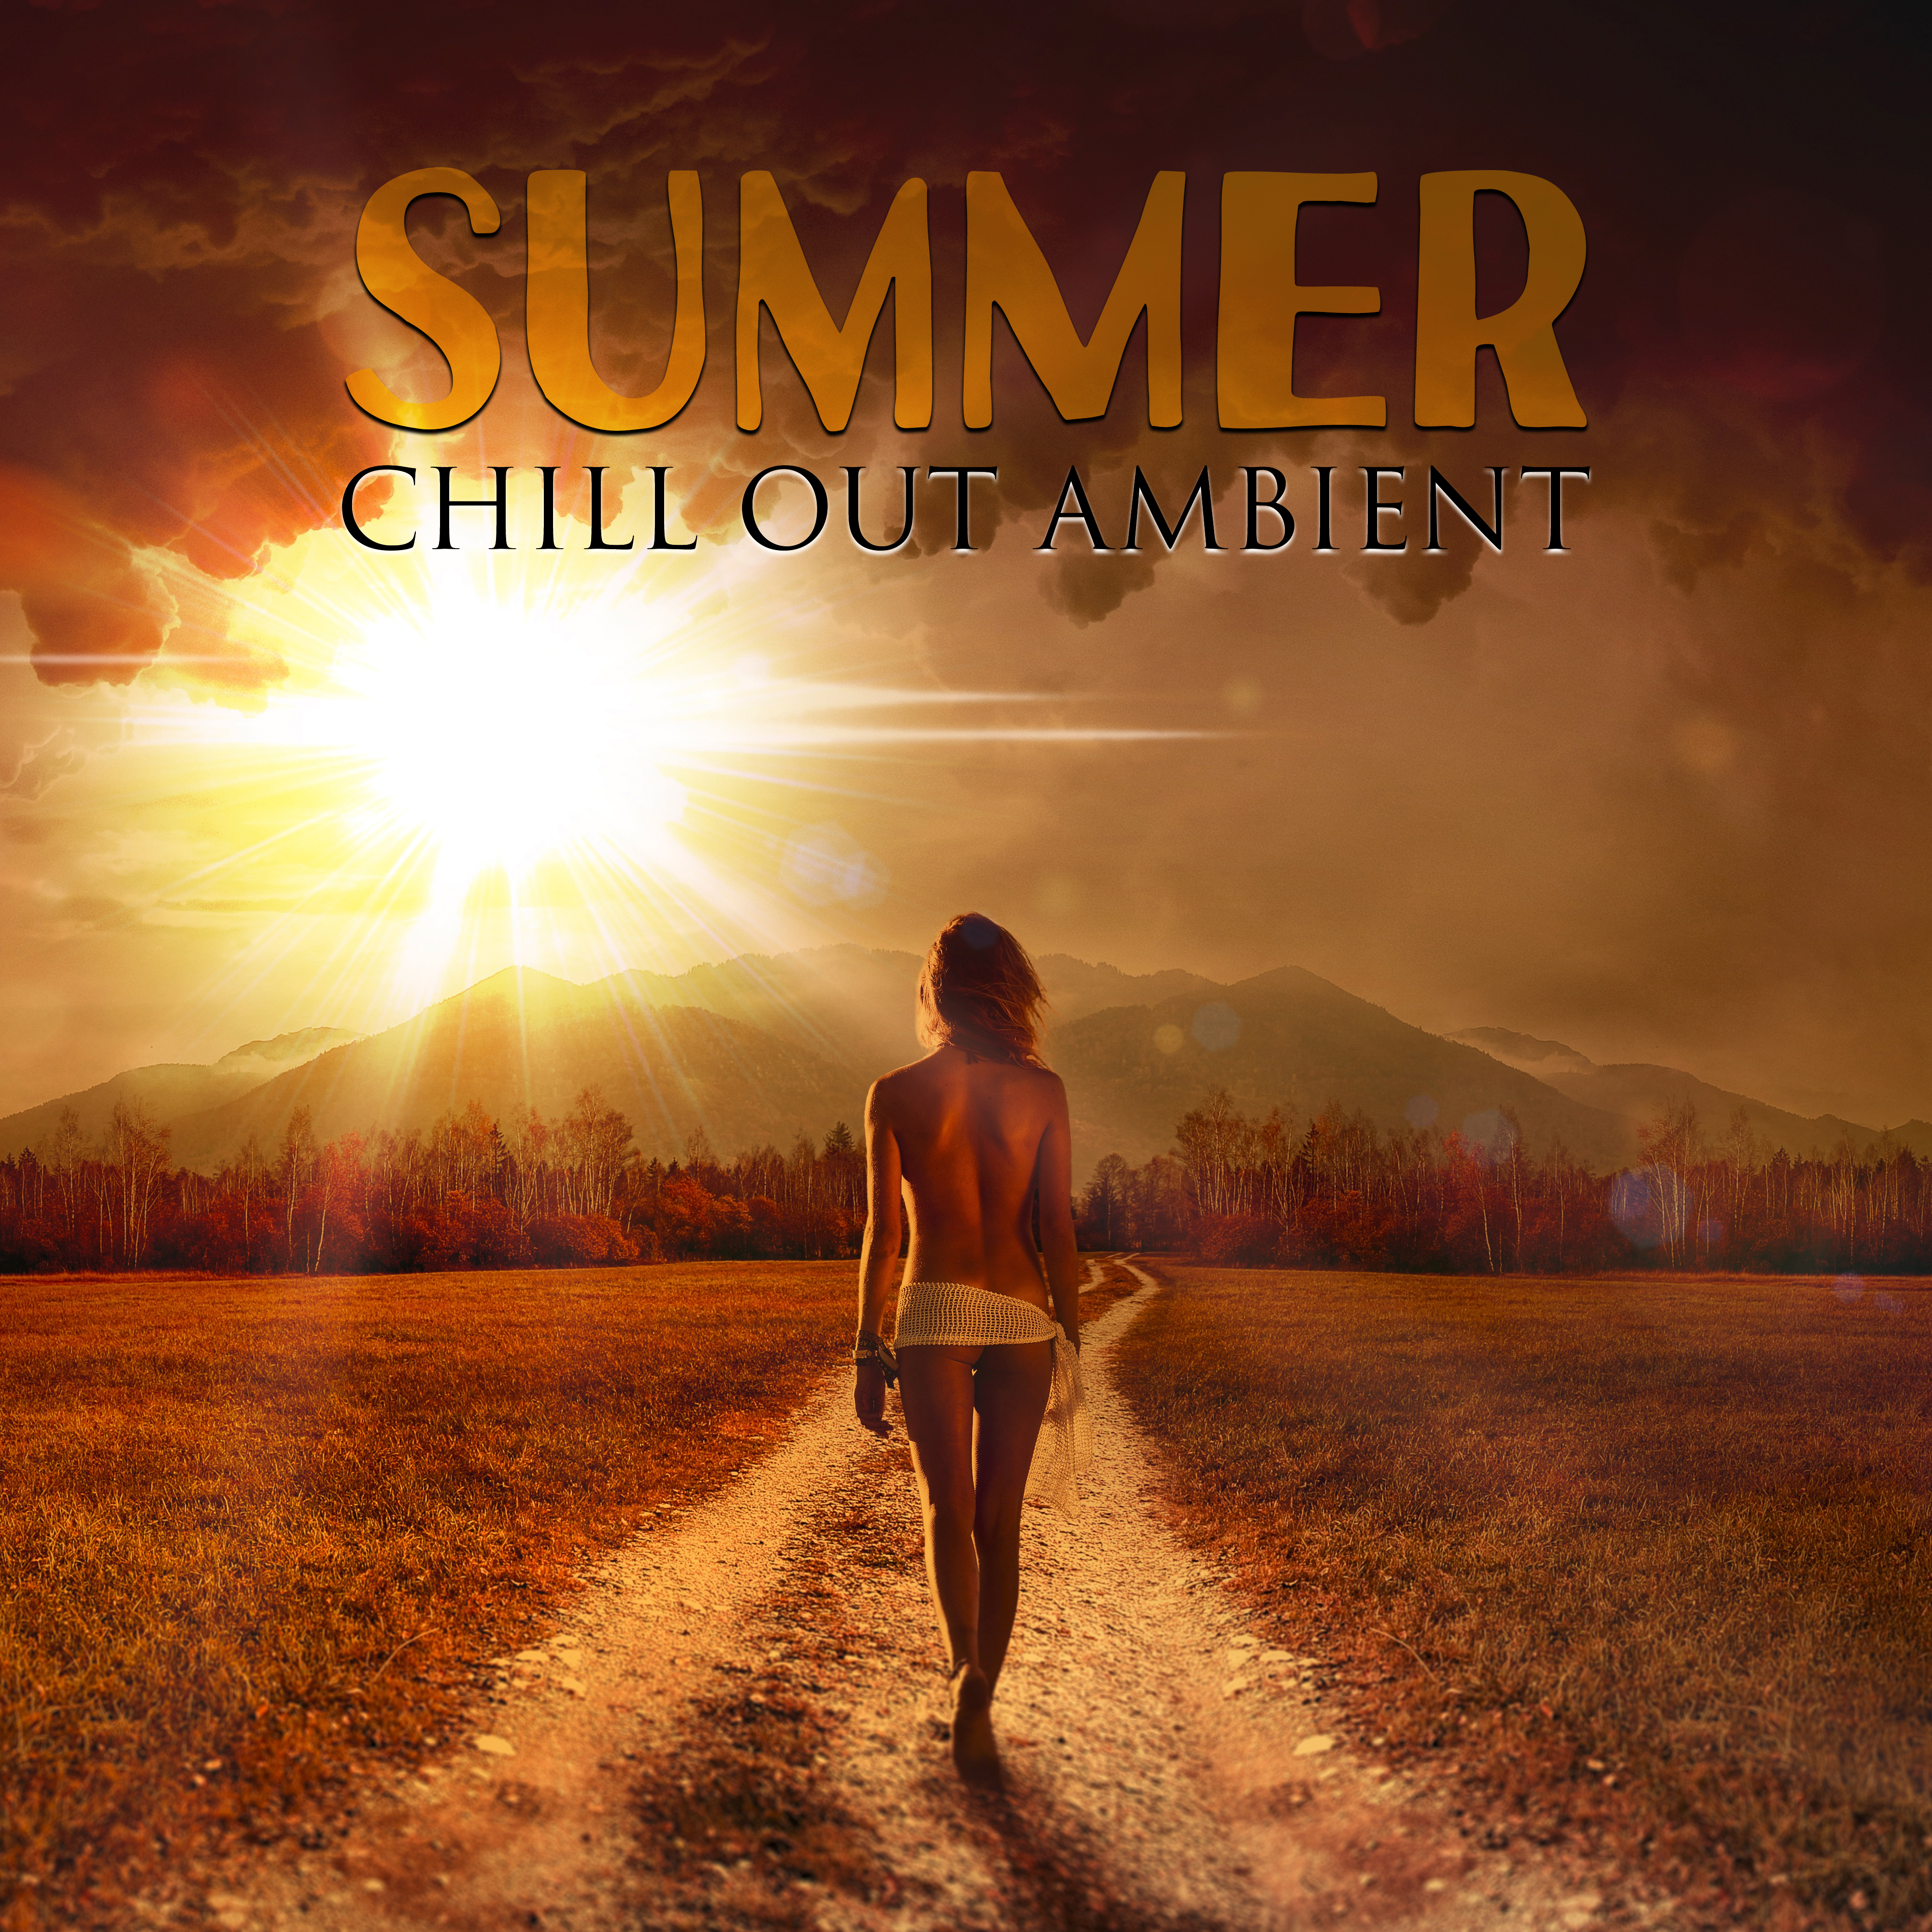 Summer Chill Out Ambient – Calm Sounds to Relax, Easy Listening, Peaceful Mind, Stress Free